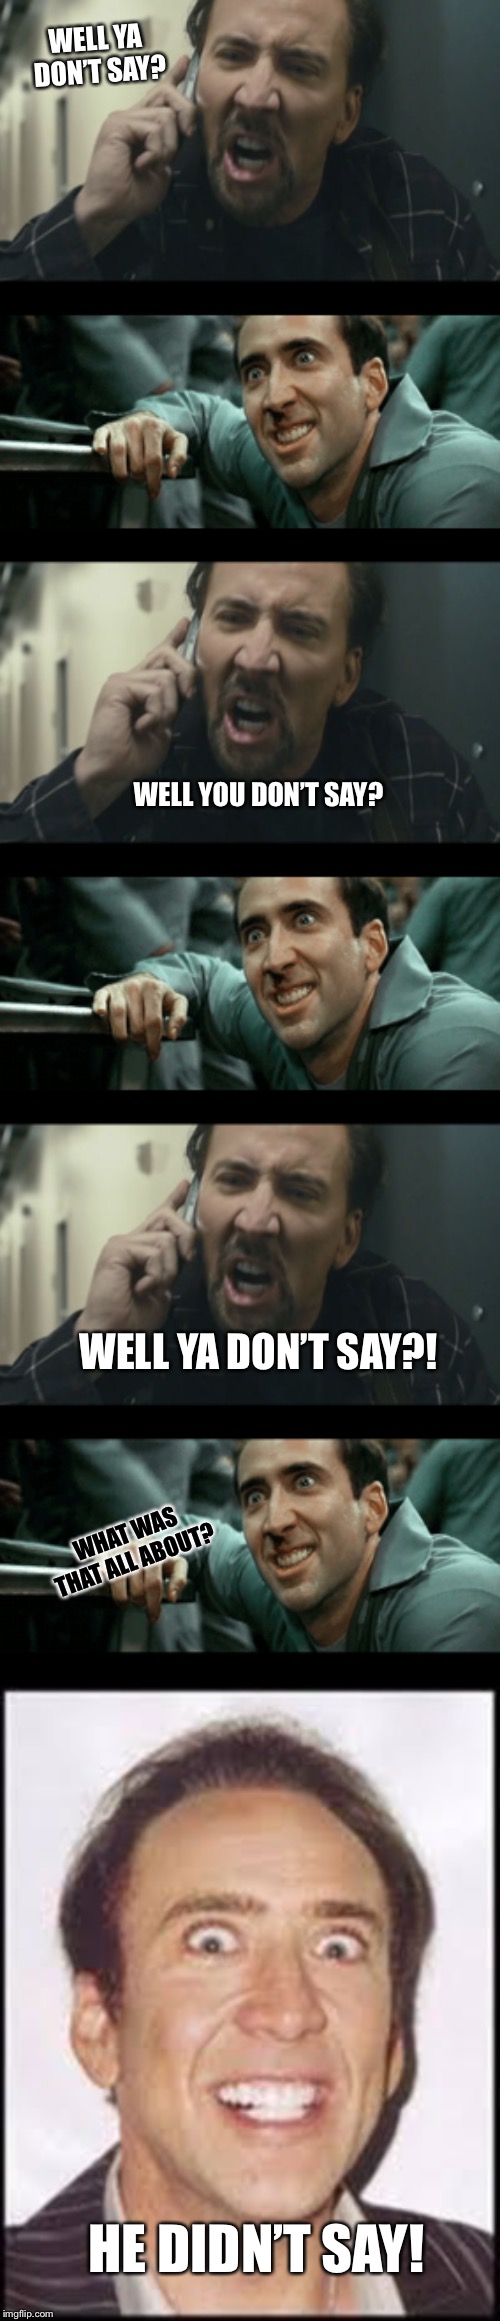 A joke the Cage way | WELL YA DON’T SAY? WELL YOU DON’T SAY? WELL YA DON’T SAY?! WHAT WAS THAT ALL ABOUT? HE DIDN’T SAY! | image tagged in nick cage,crazy nick cage | made w/ Imgflip meme maker